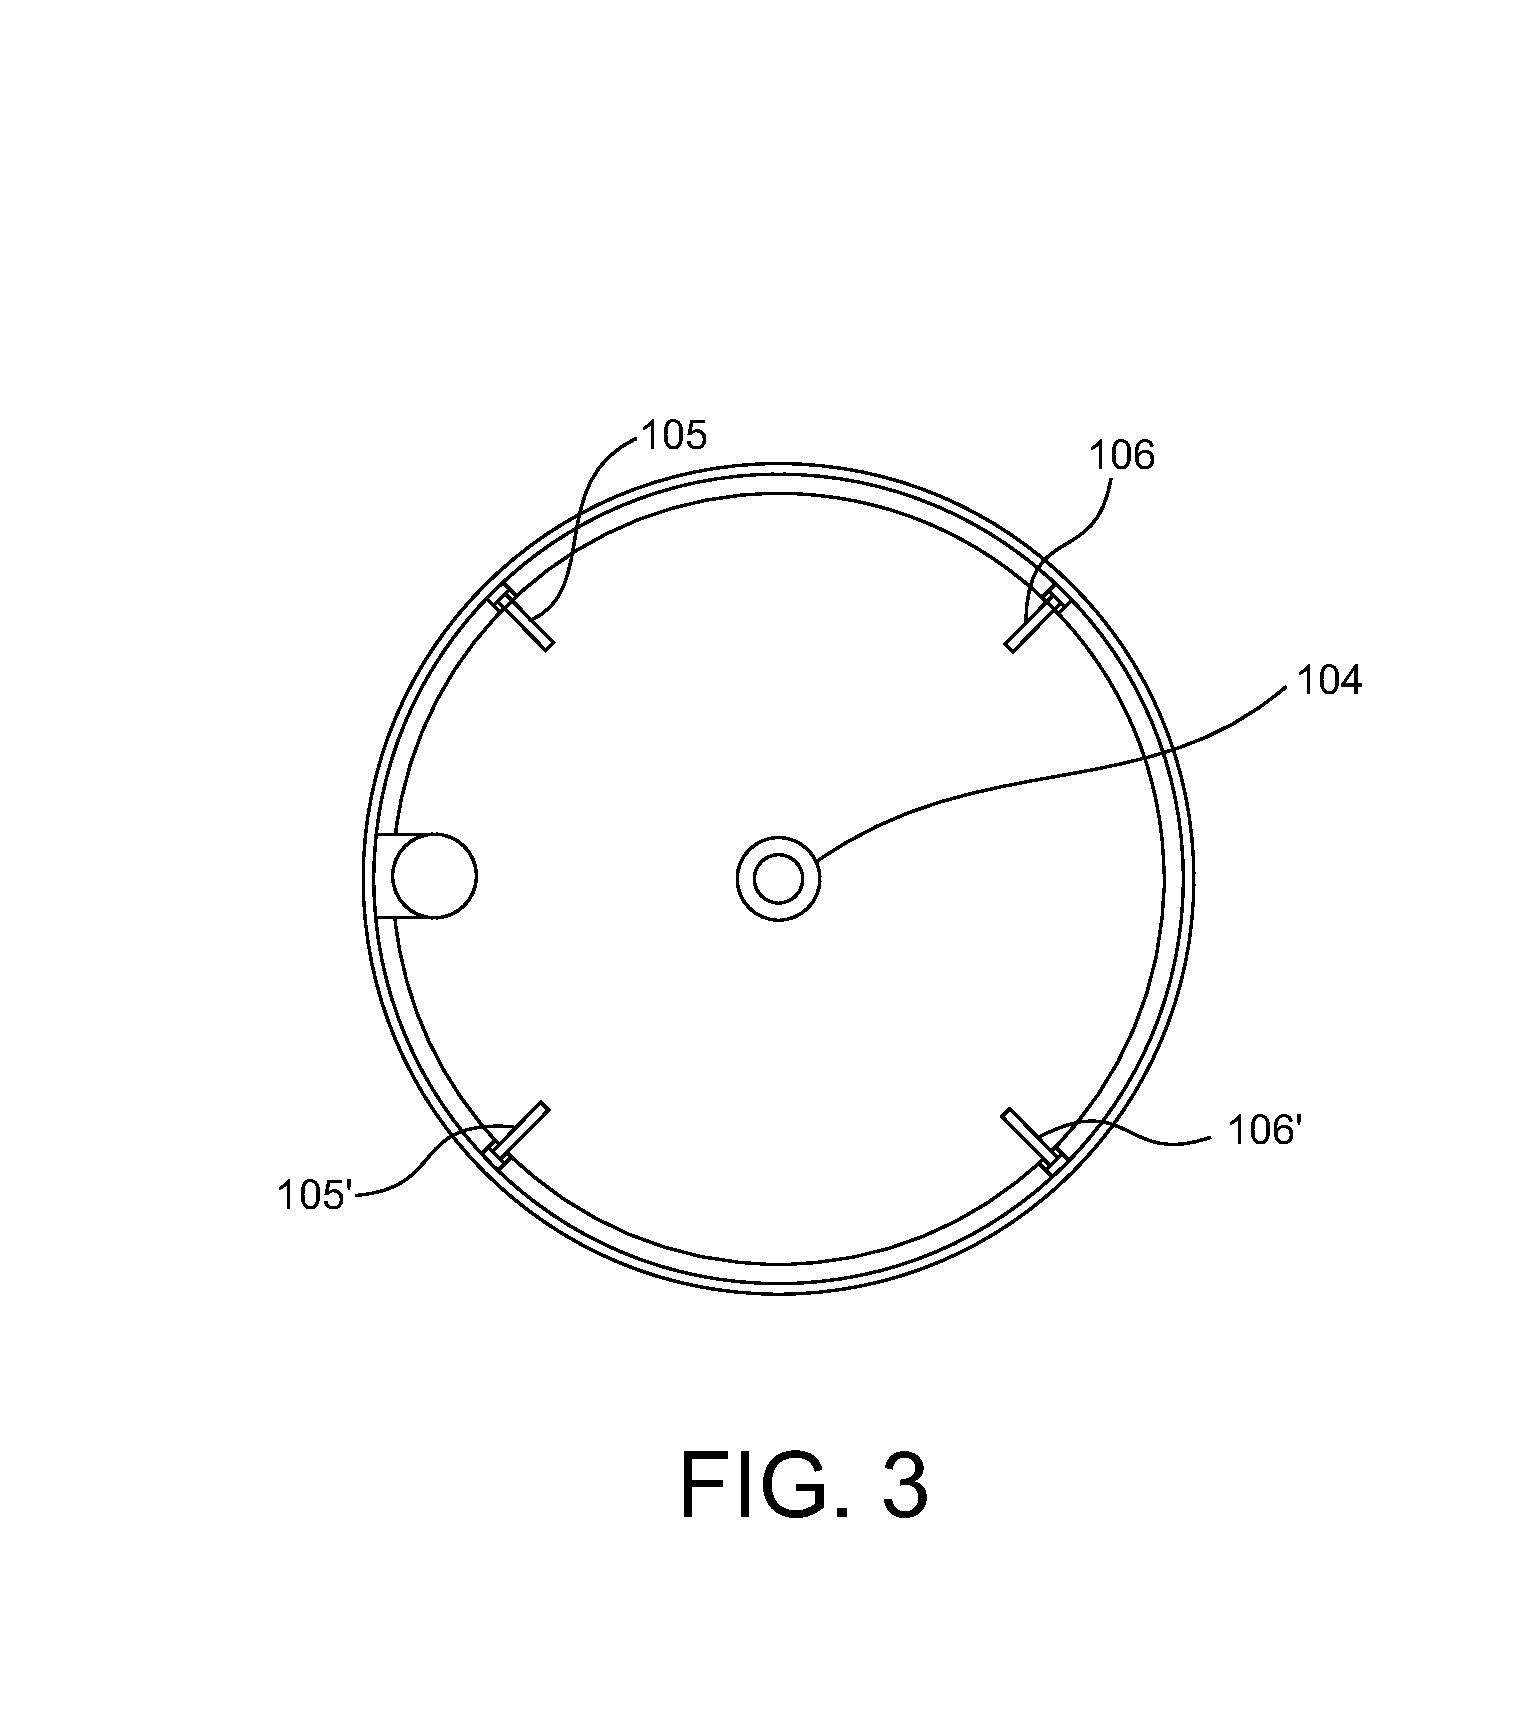 Bioleaching bioreactor with a system for injection and diffusion of air